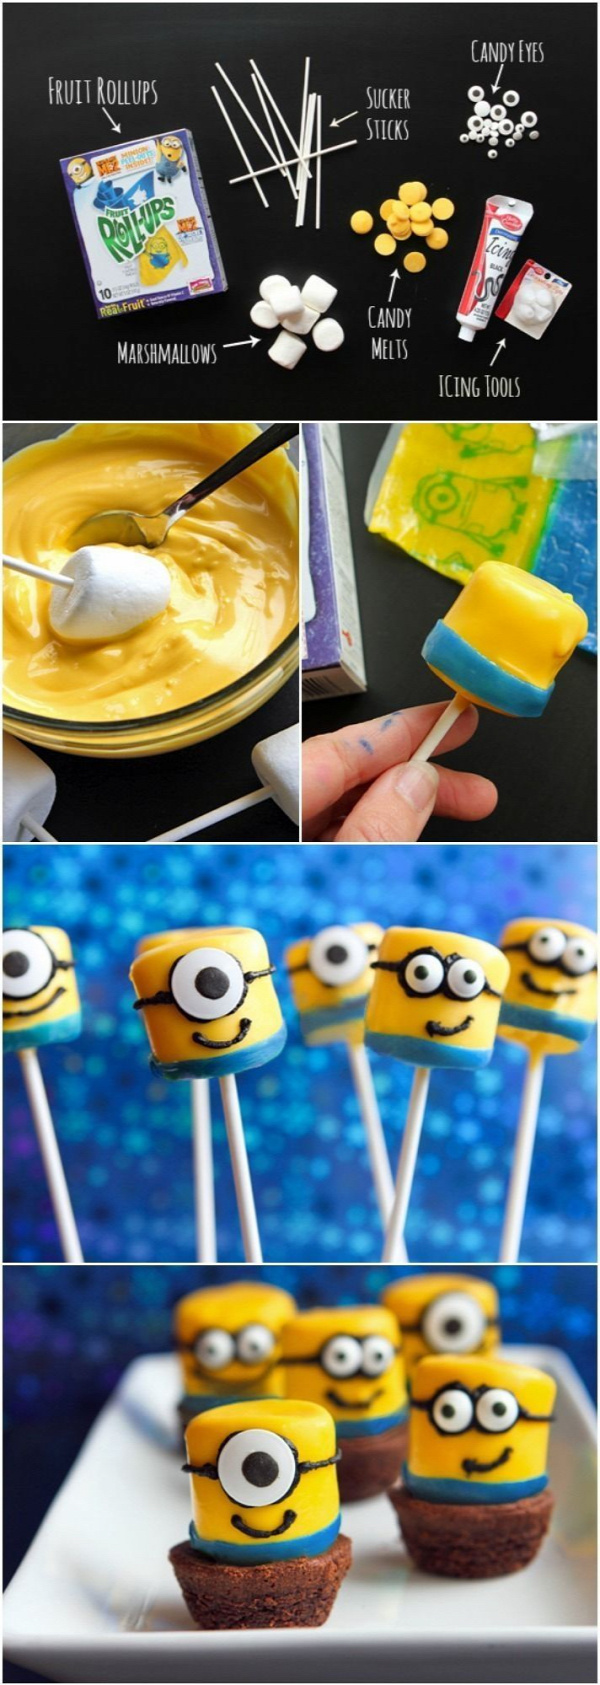 Dispicable Me Minions ... These guys are super cute and fairly easy to make. Just a little time consuming.